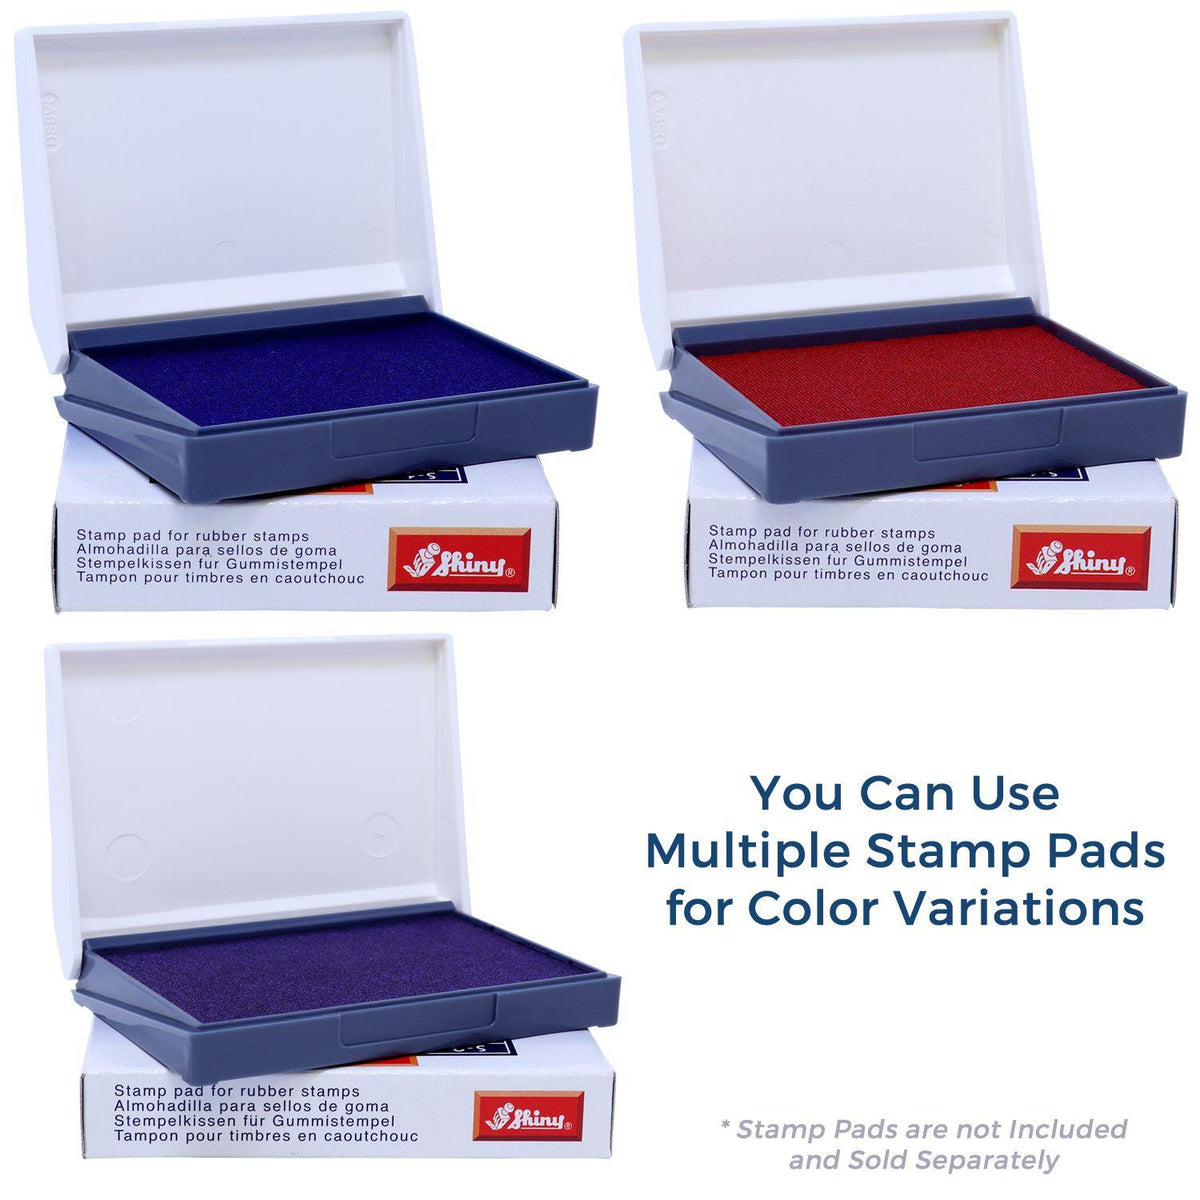 Stamp Pads for Large Check Your Work Rubber Stamp Available